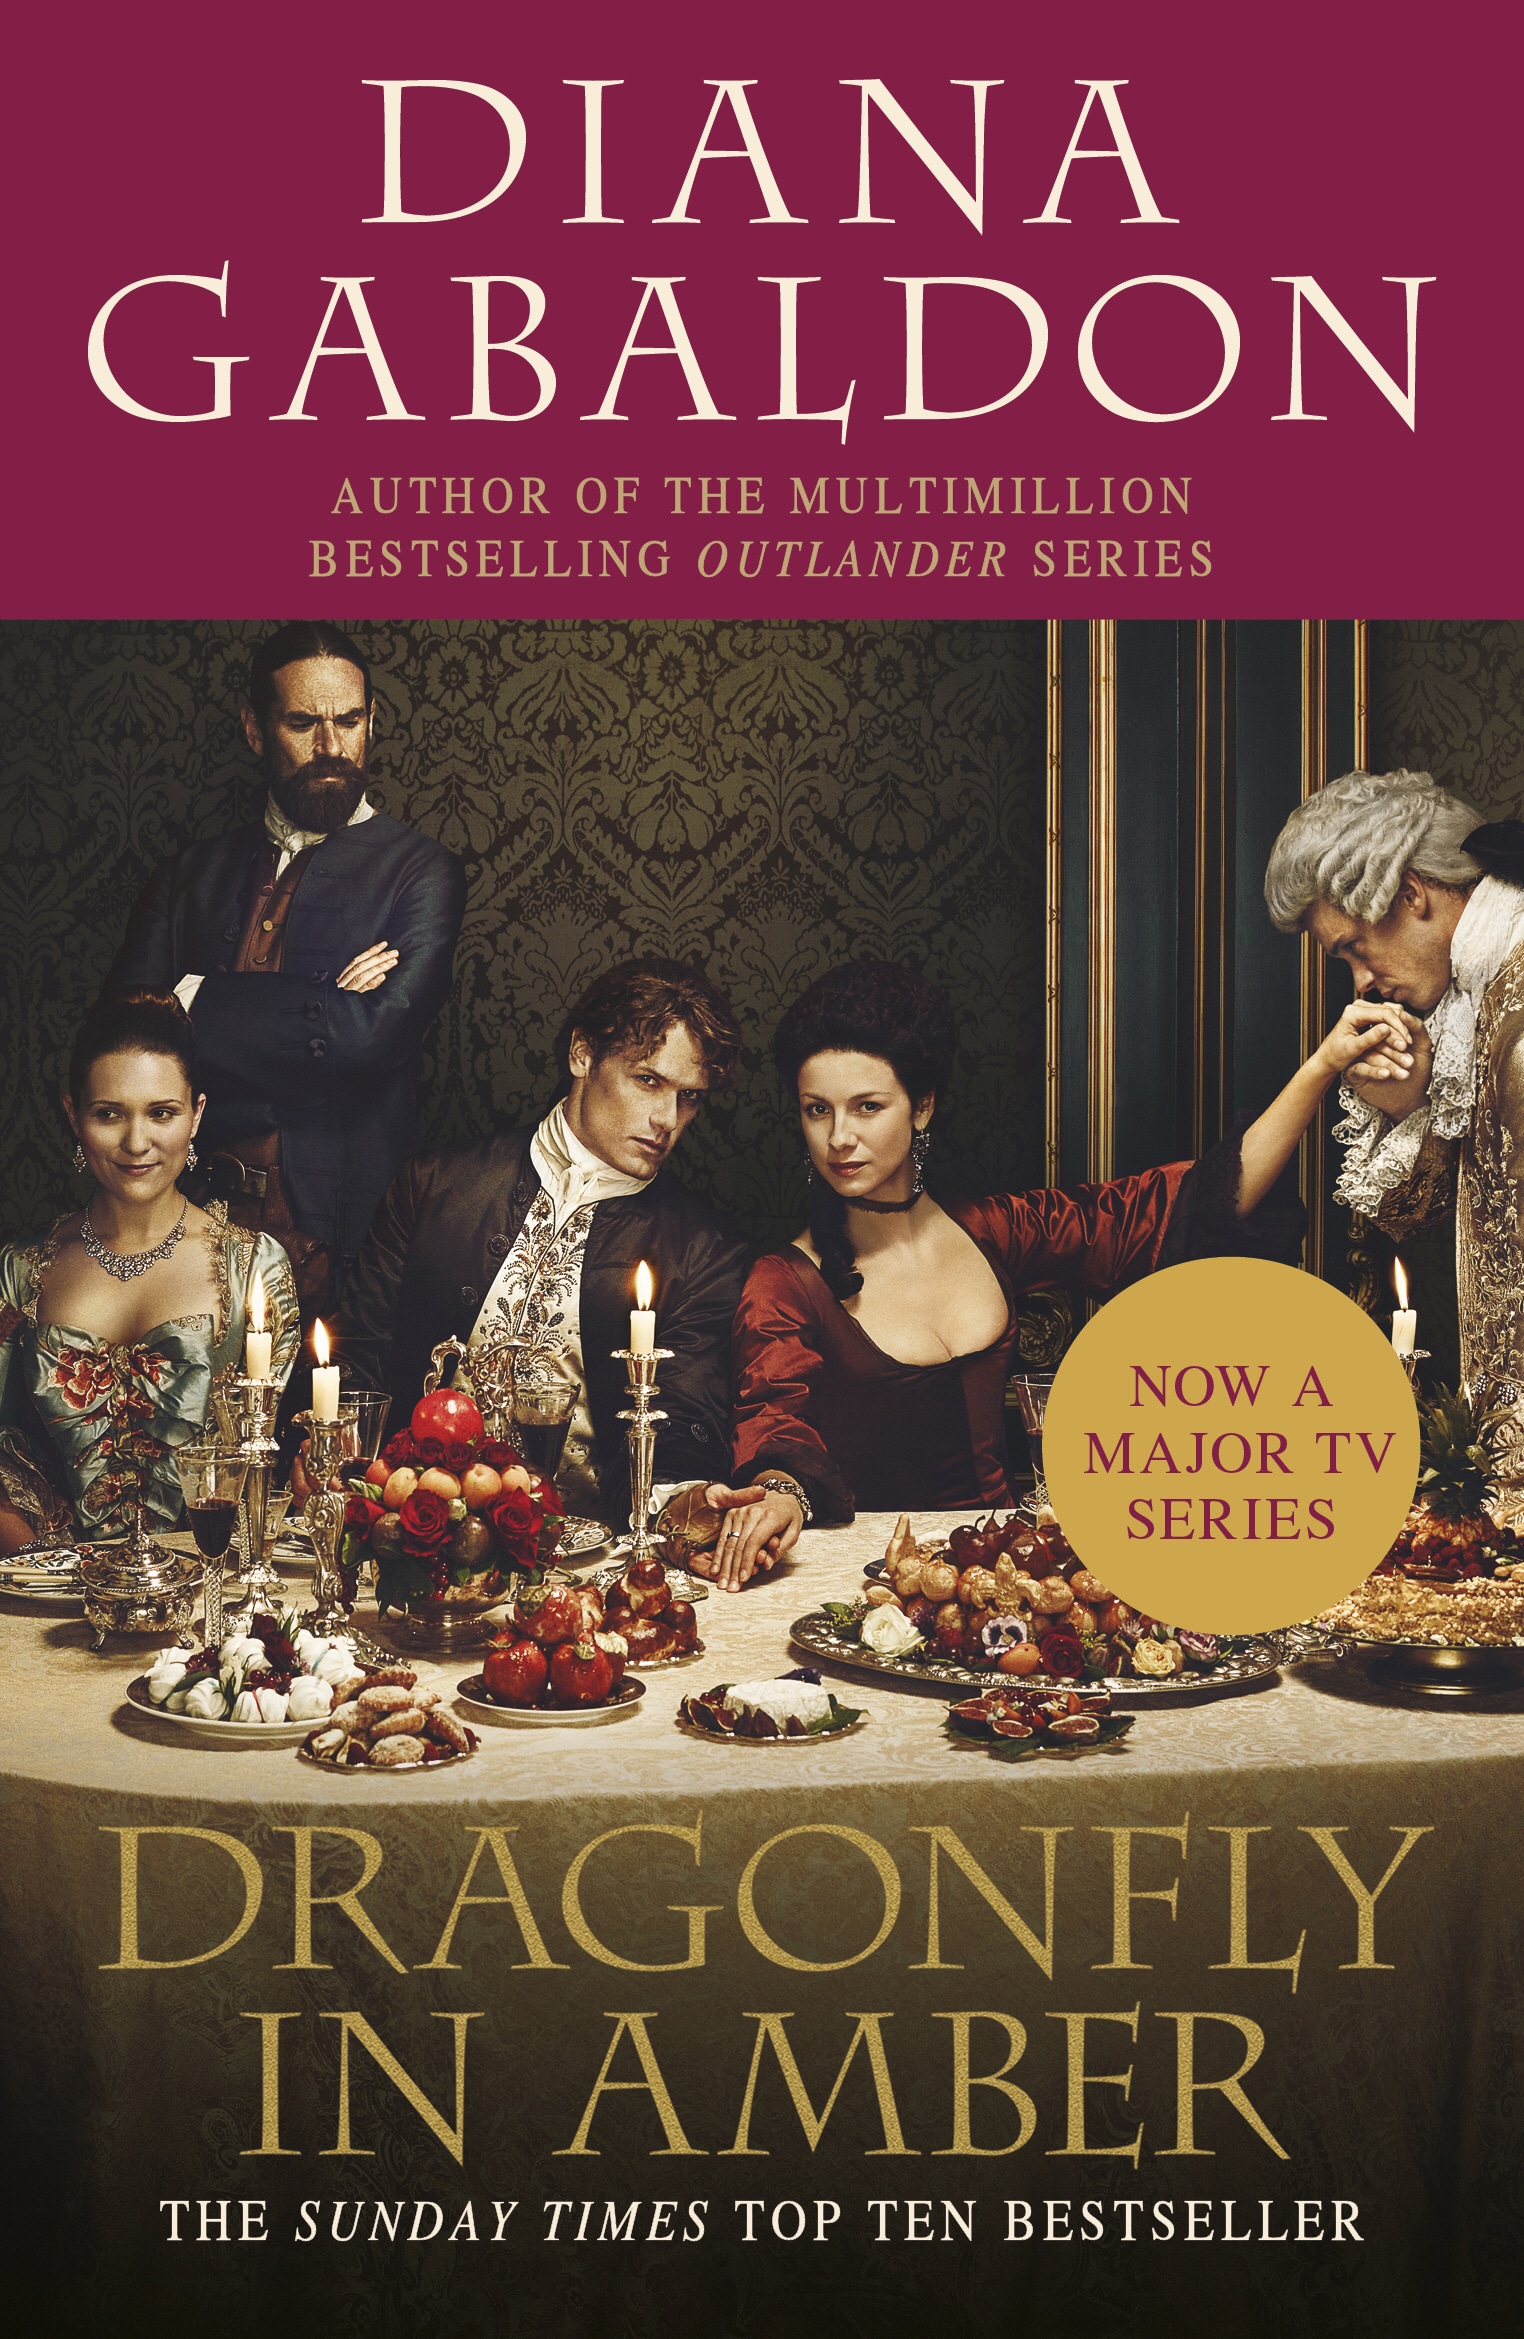 Book “Dragonfly In Amber” by Diana Gabaldon — March 10, 2016